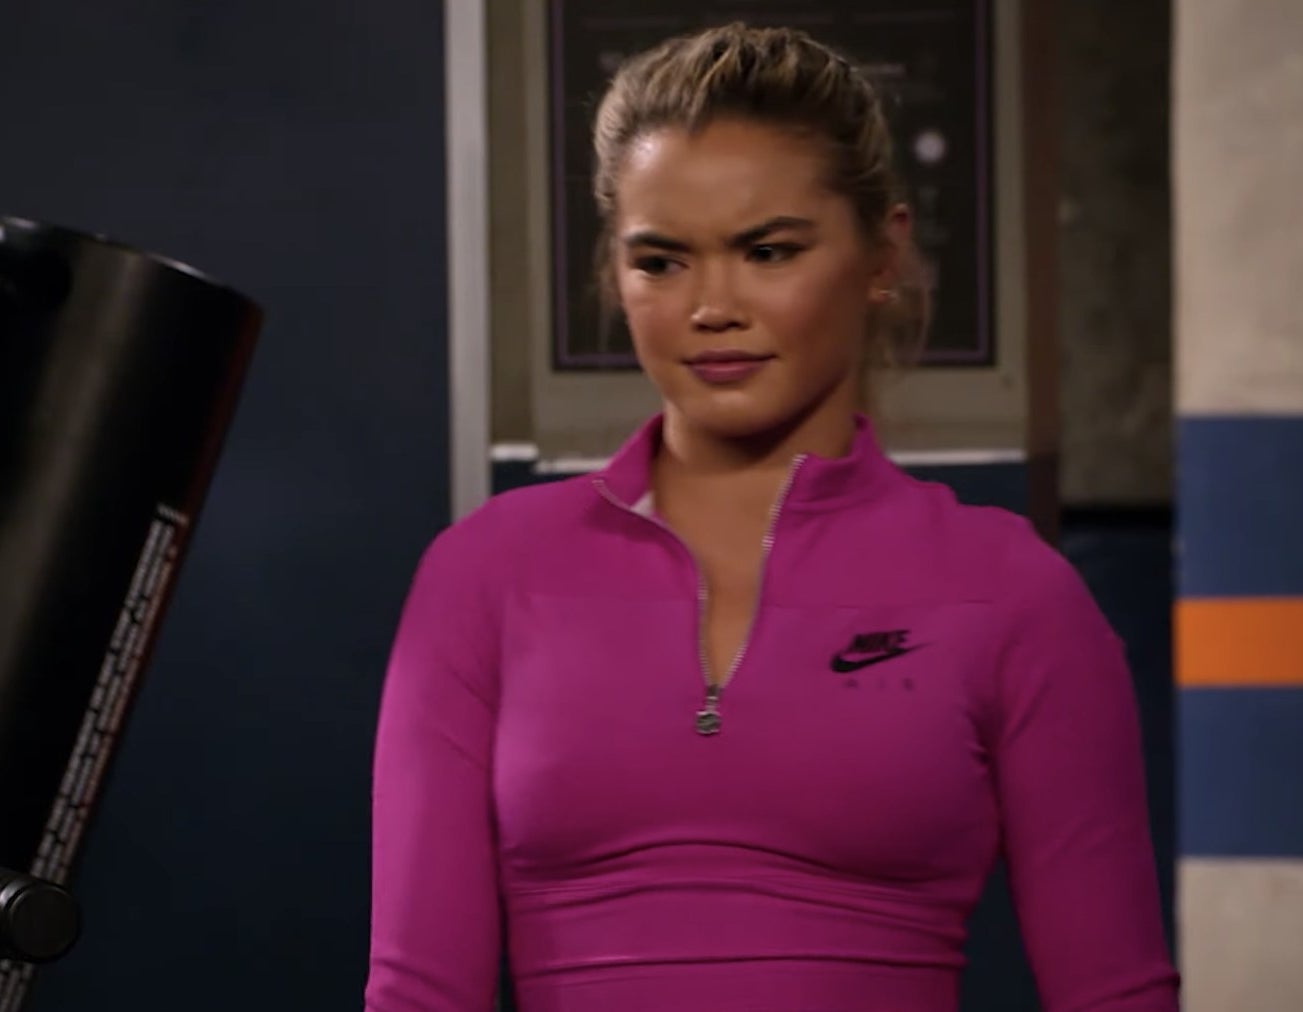 Paris Berelc in a pink sports sweater looking confused.